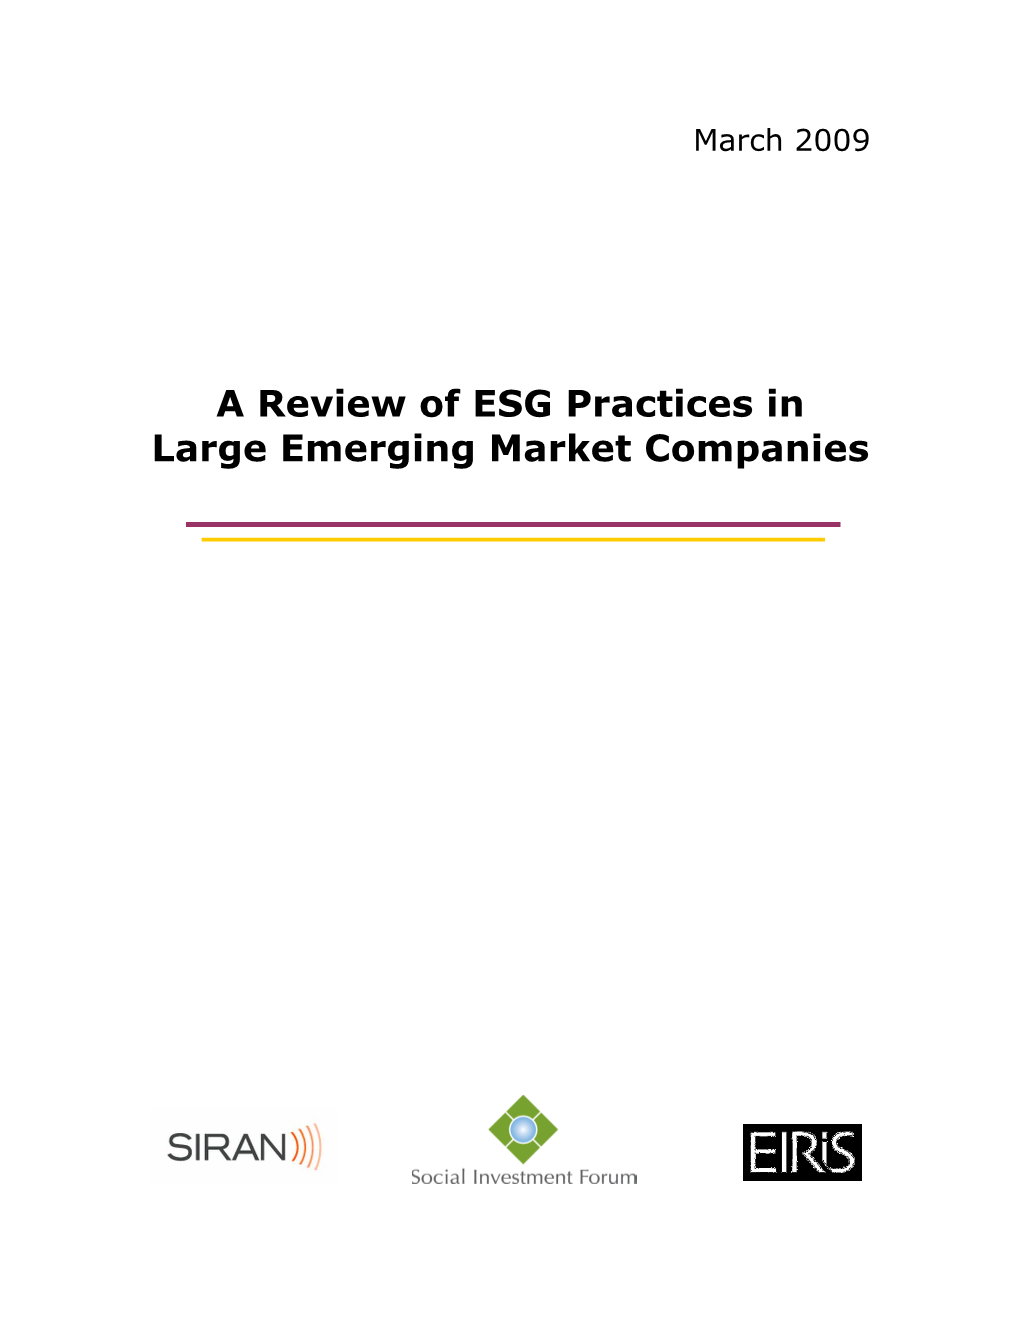 A Review of ESG Practices in Large Emerging Market Companies